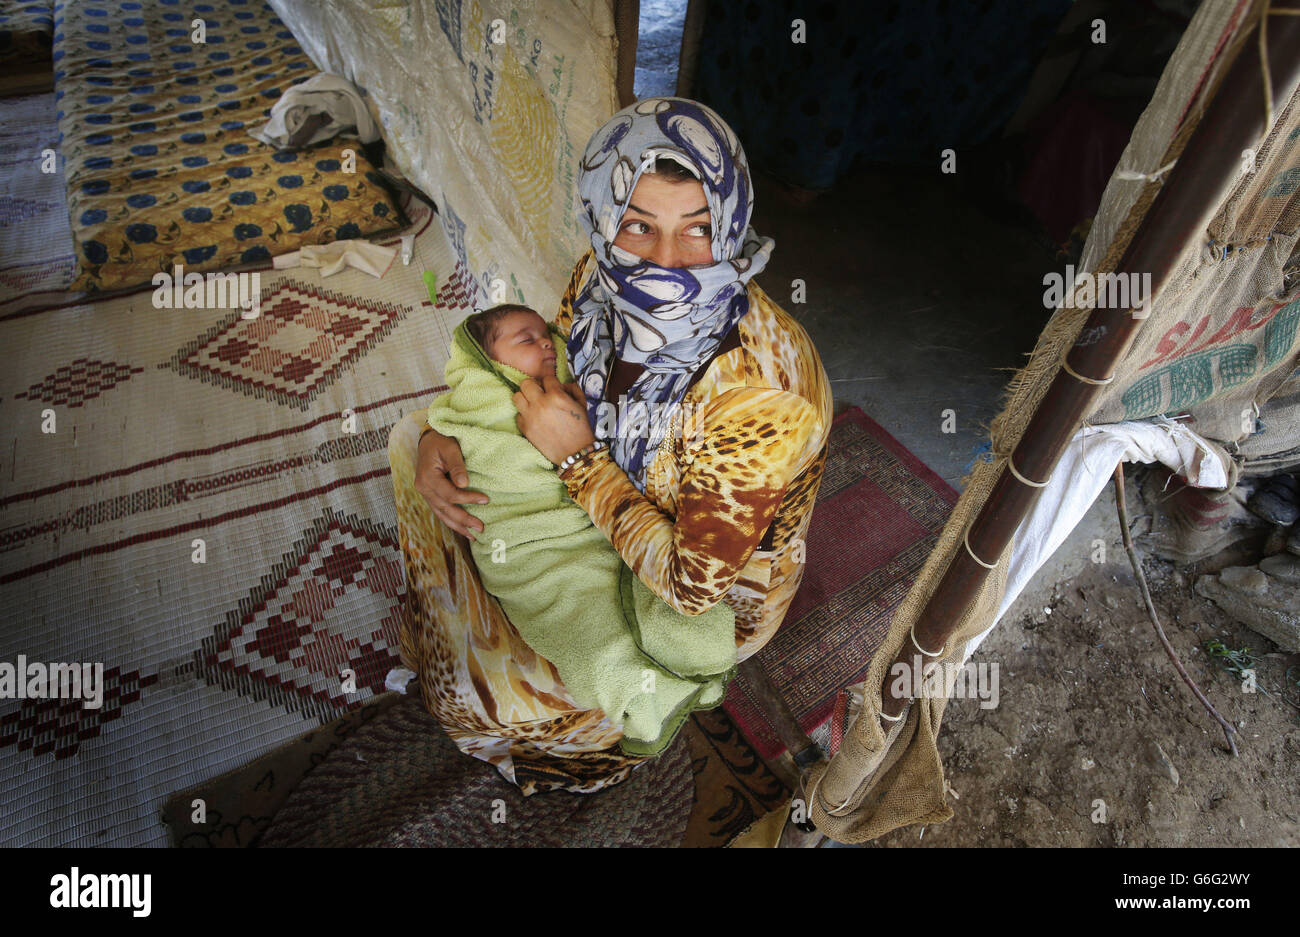 Syrian refugee Shaha Ibrahim and her two month-old daughter Bayane, who fled their home in Syria after 18 days of fighting that killed two of Shaha's cousins, in the makeshift settlement of Qab Elias in the Bekaa Valley, Lebanon. Stock Photo